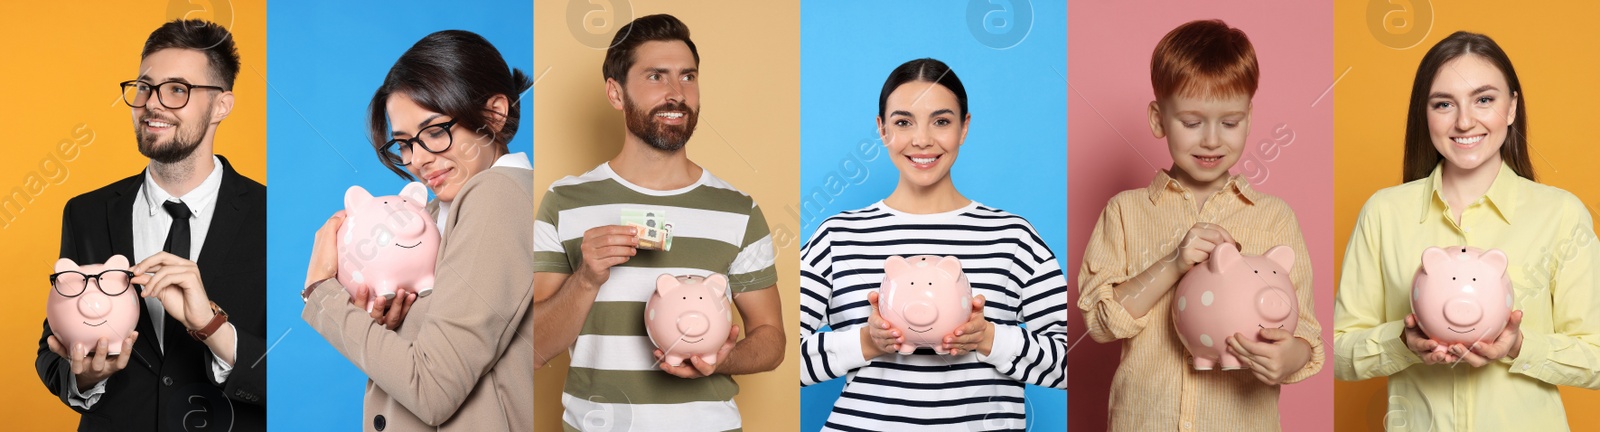 Image of Collage with photos of people holding ceramic piggy banks on different color backgrounds. Banner design